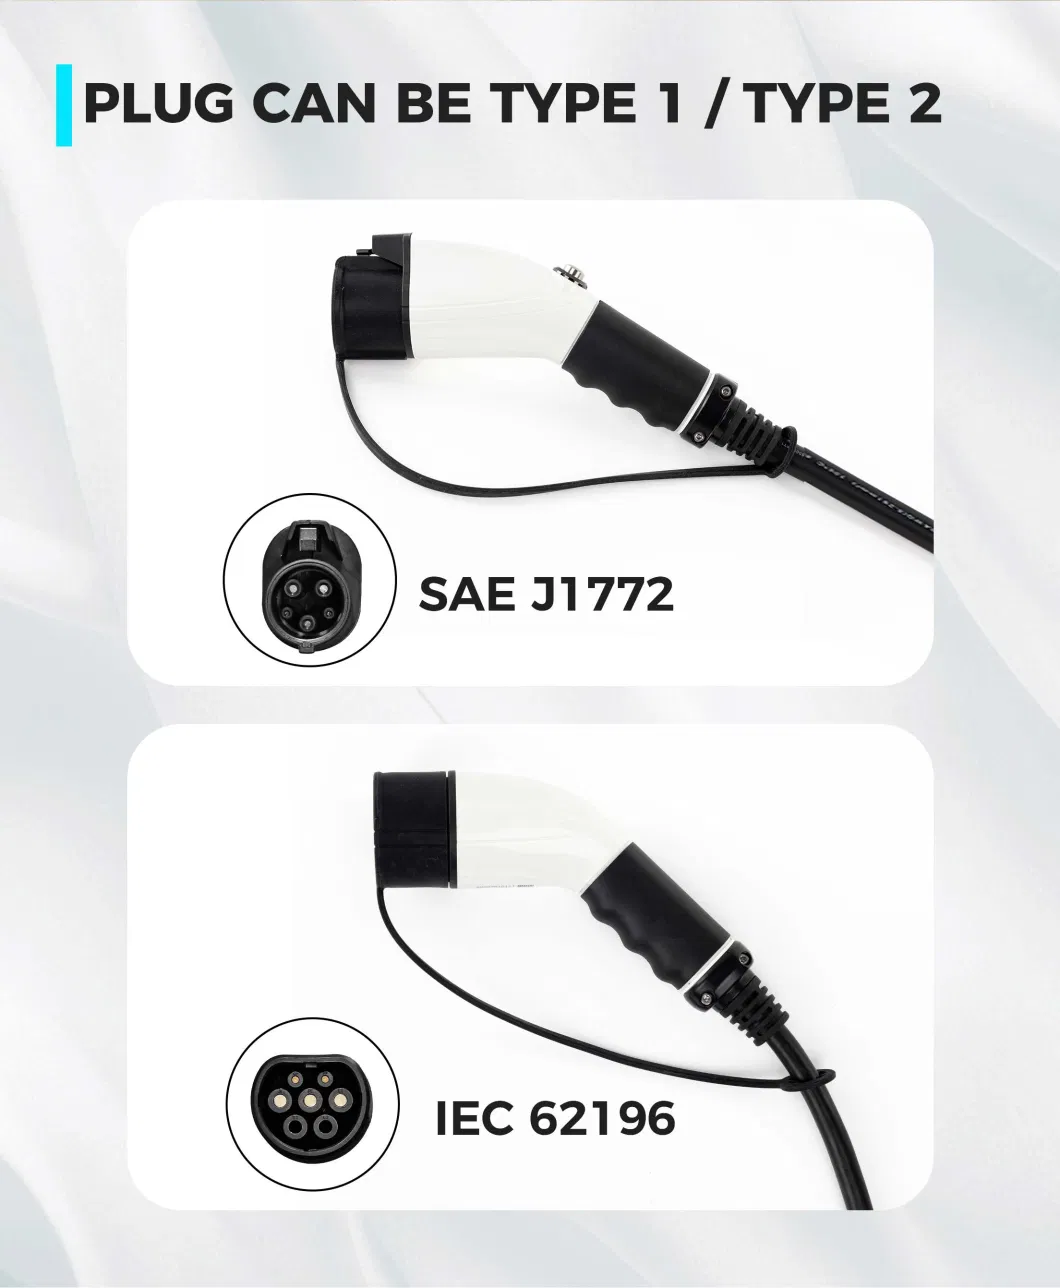 Wholesale EV Charger Supplier From China Producing 7kw IP66 AC Home Charger Electric Car Charging Equipment with CE Certificate